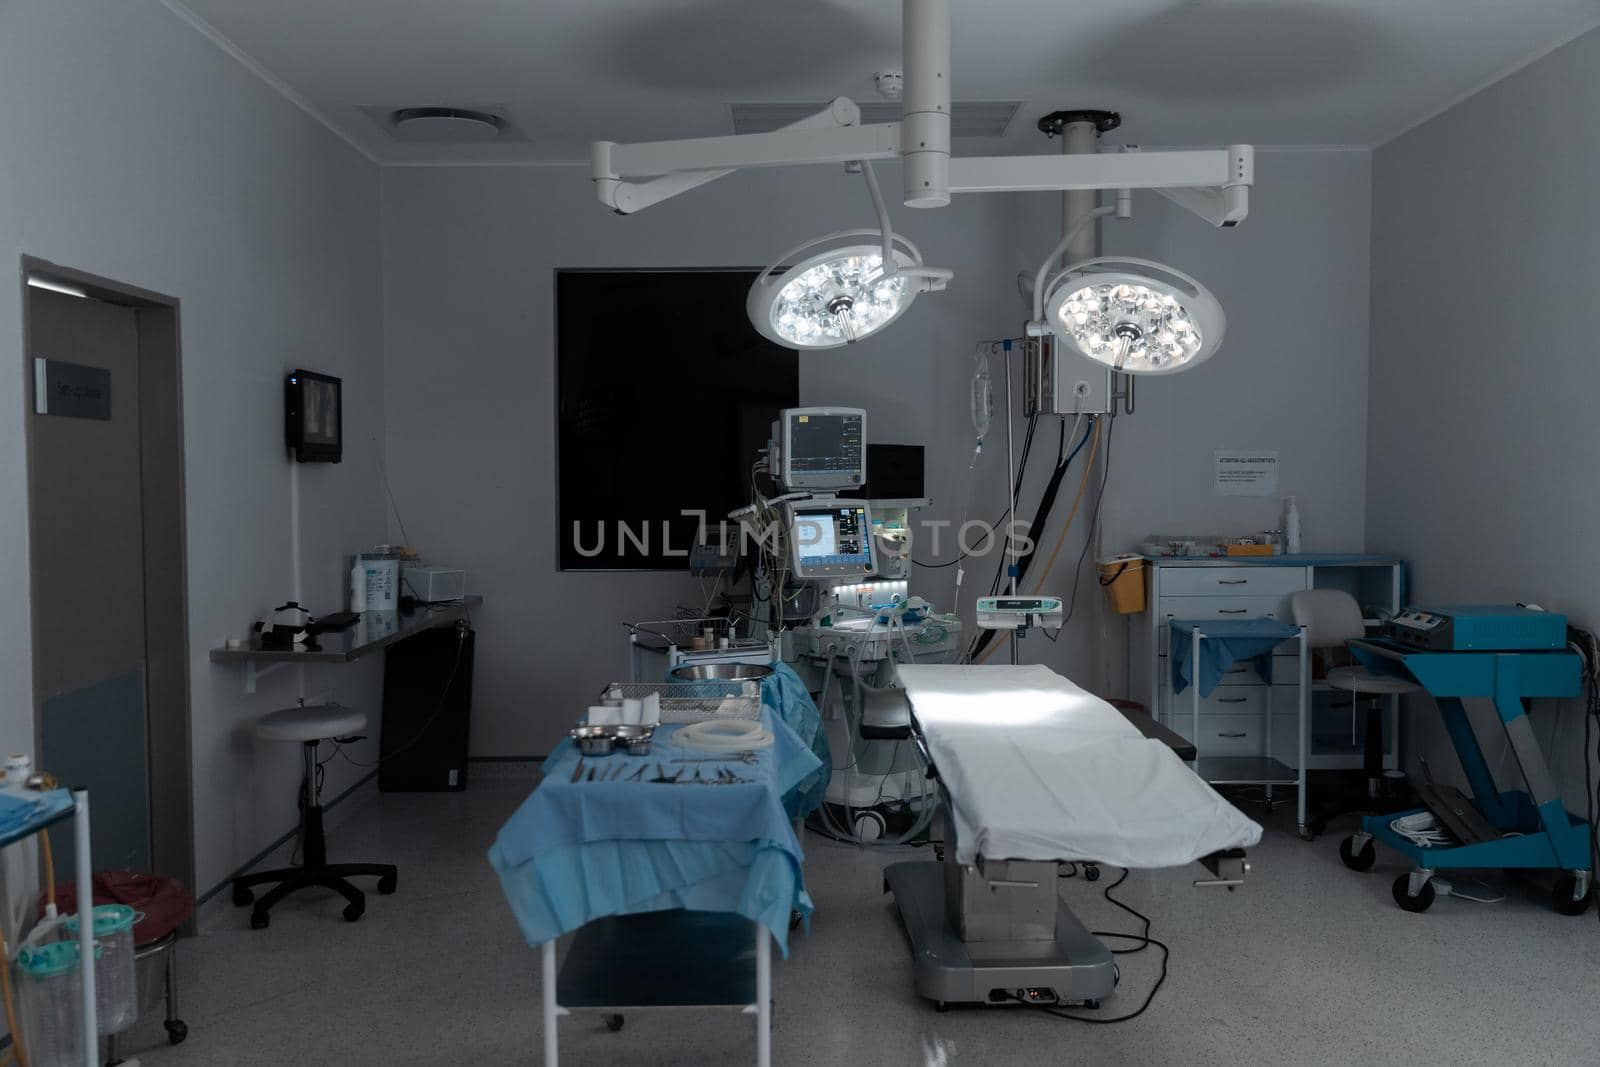 Surgical instruments, operating table, lights and equipment in modern hospital operating theatre. medicine, health and healthcare services.